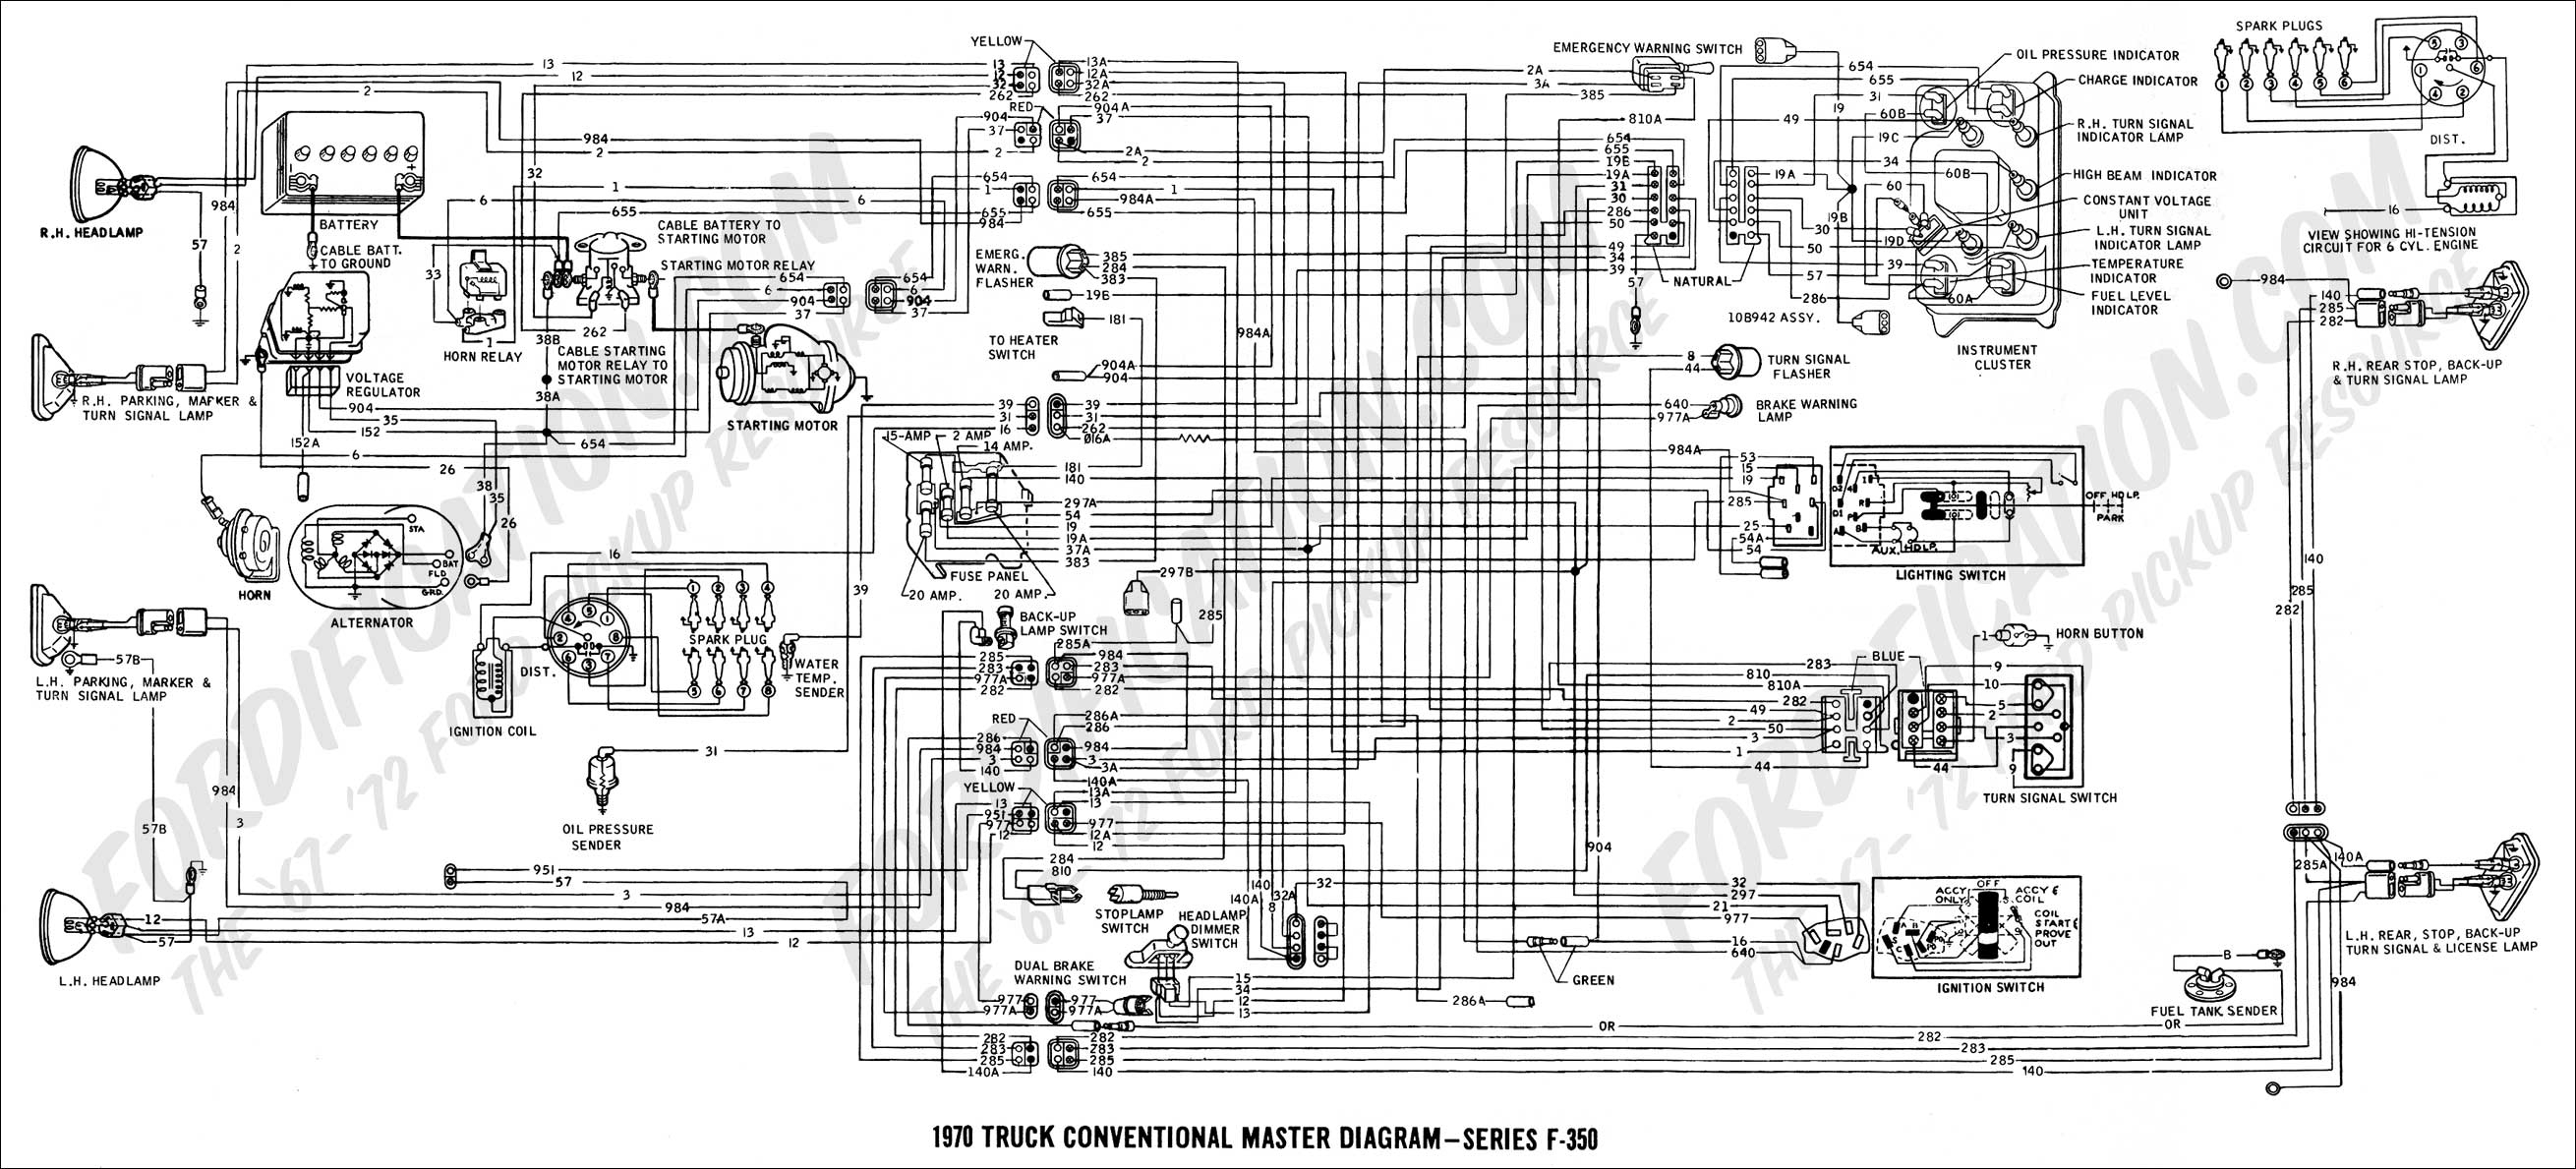 2005 Ford E250 Trailer Wiring | Wiring Diagram - Ford F250 Wiring Diagram For Trailer Lights